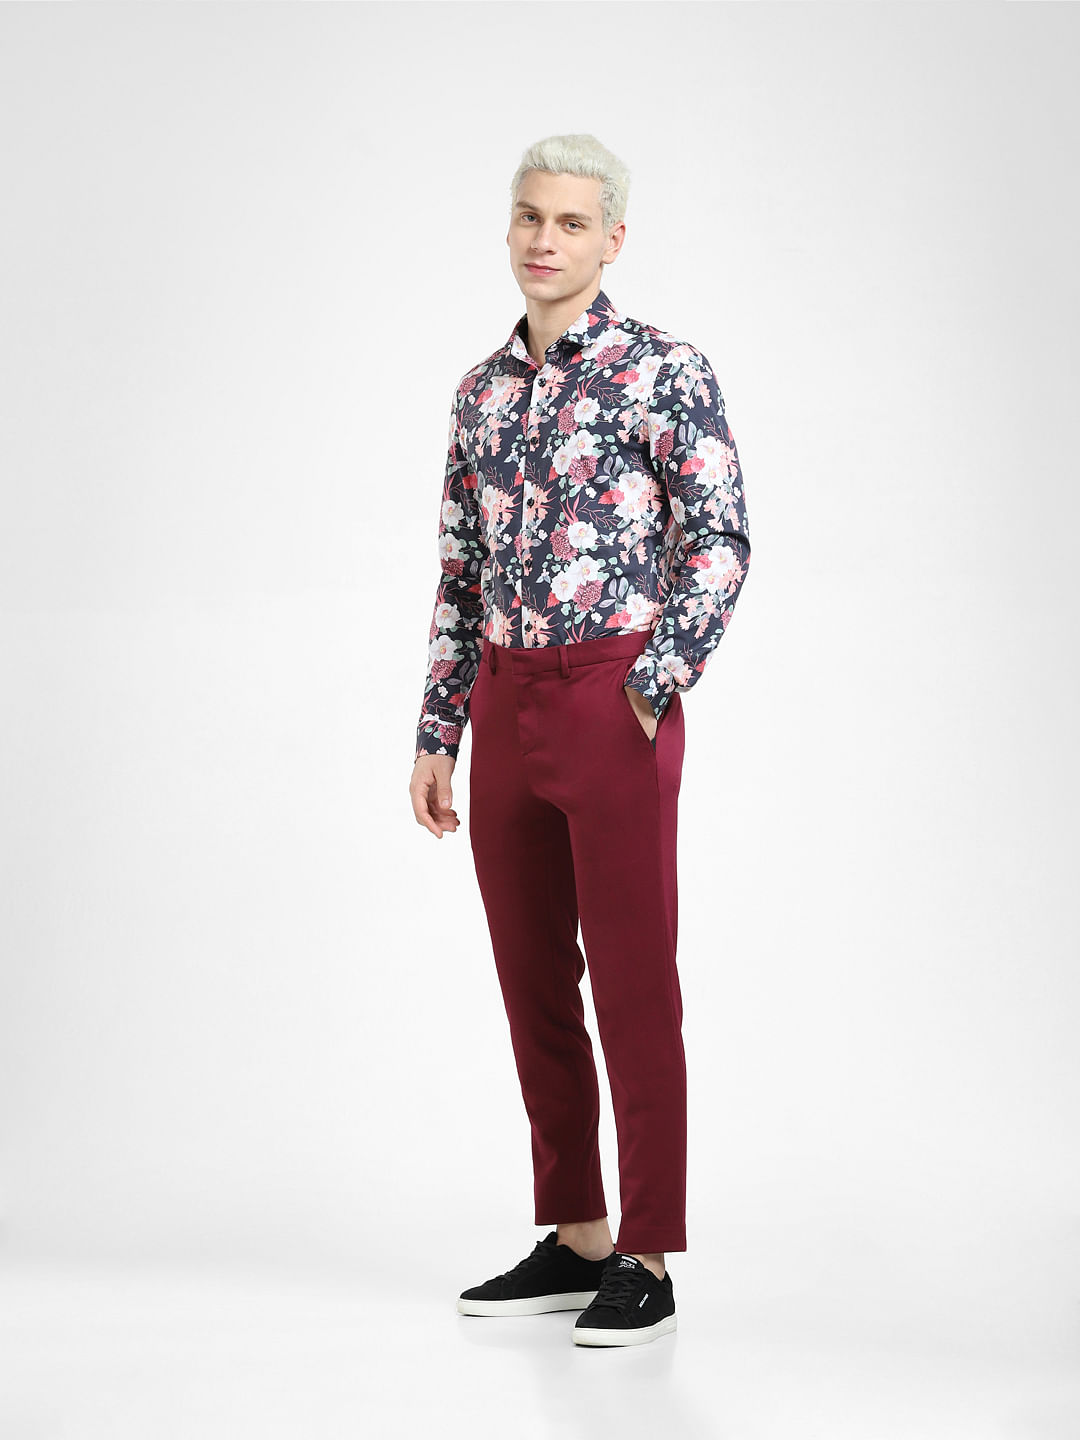 Share more than 257 floral trousers mens